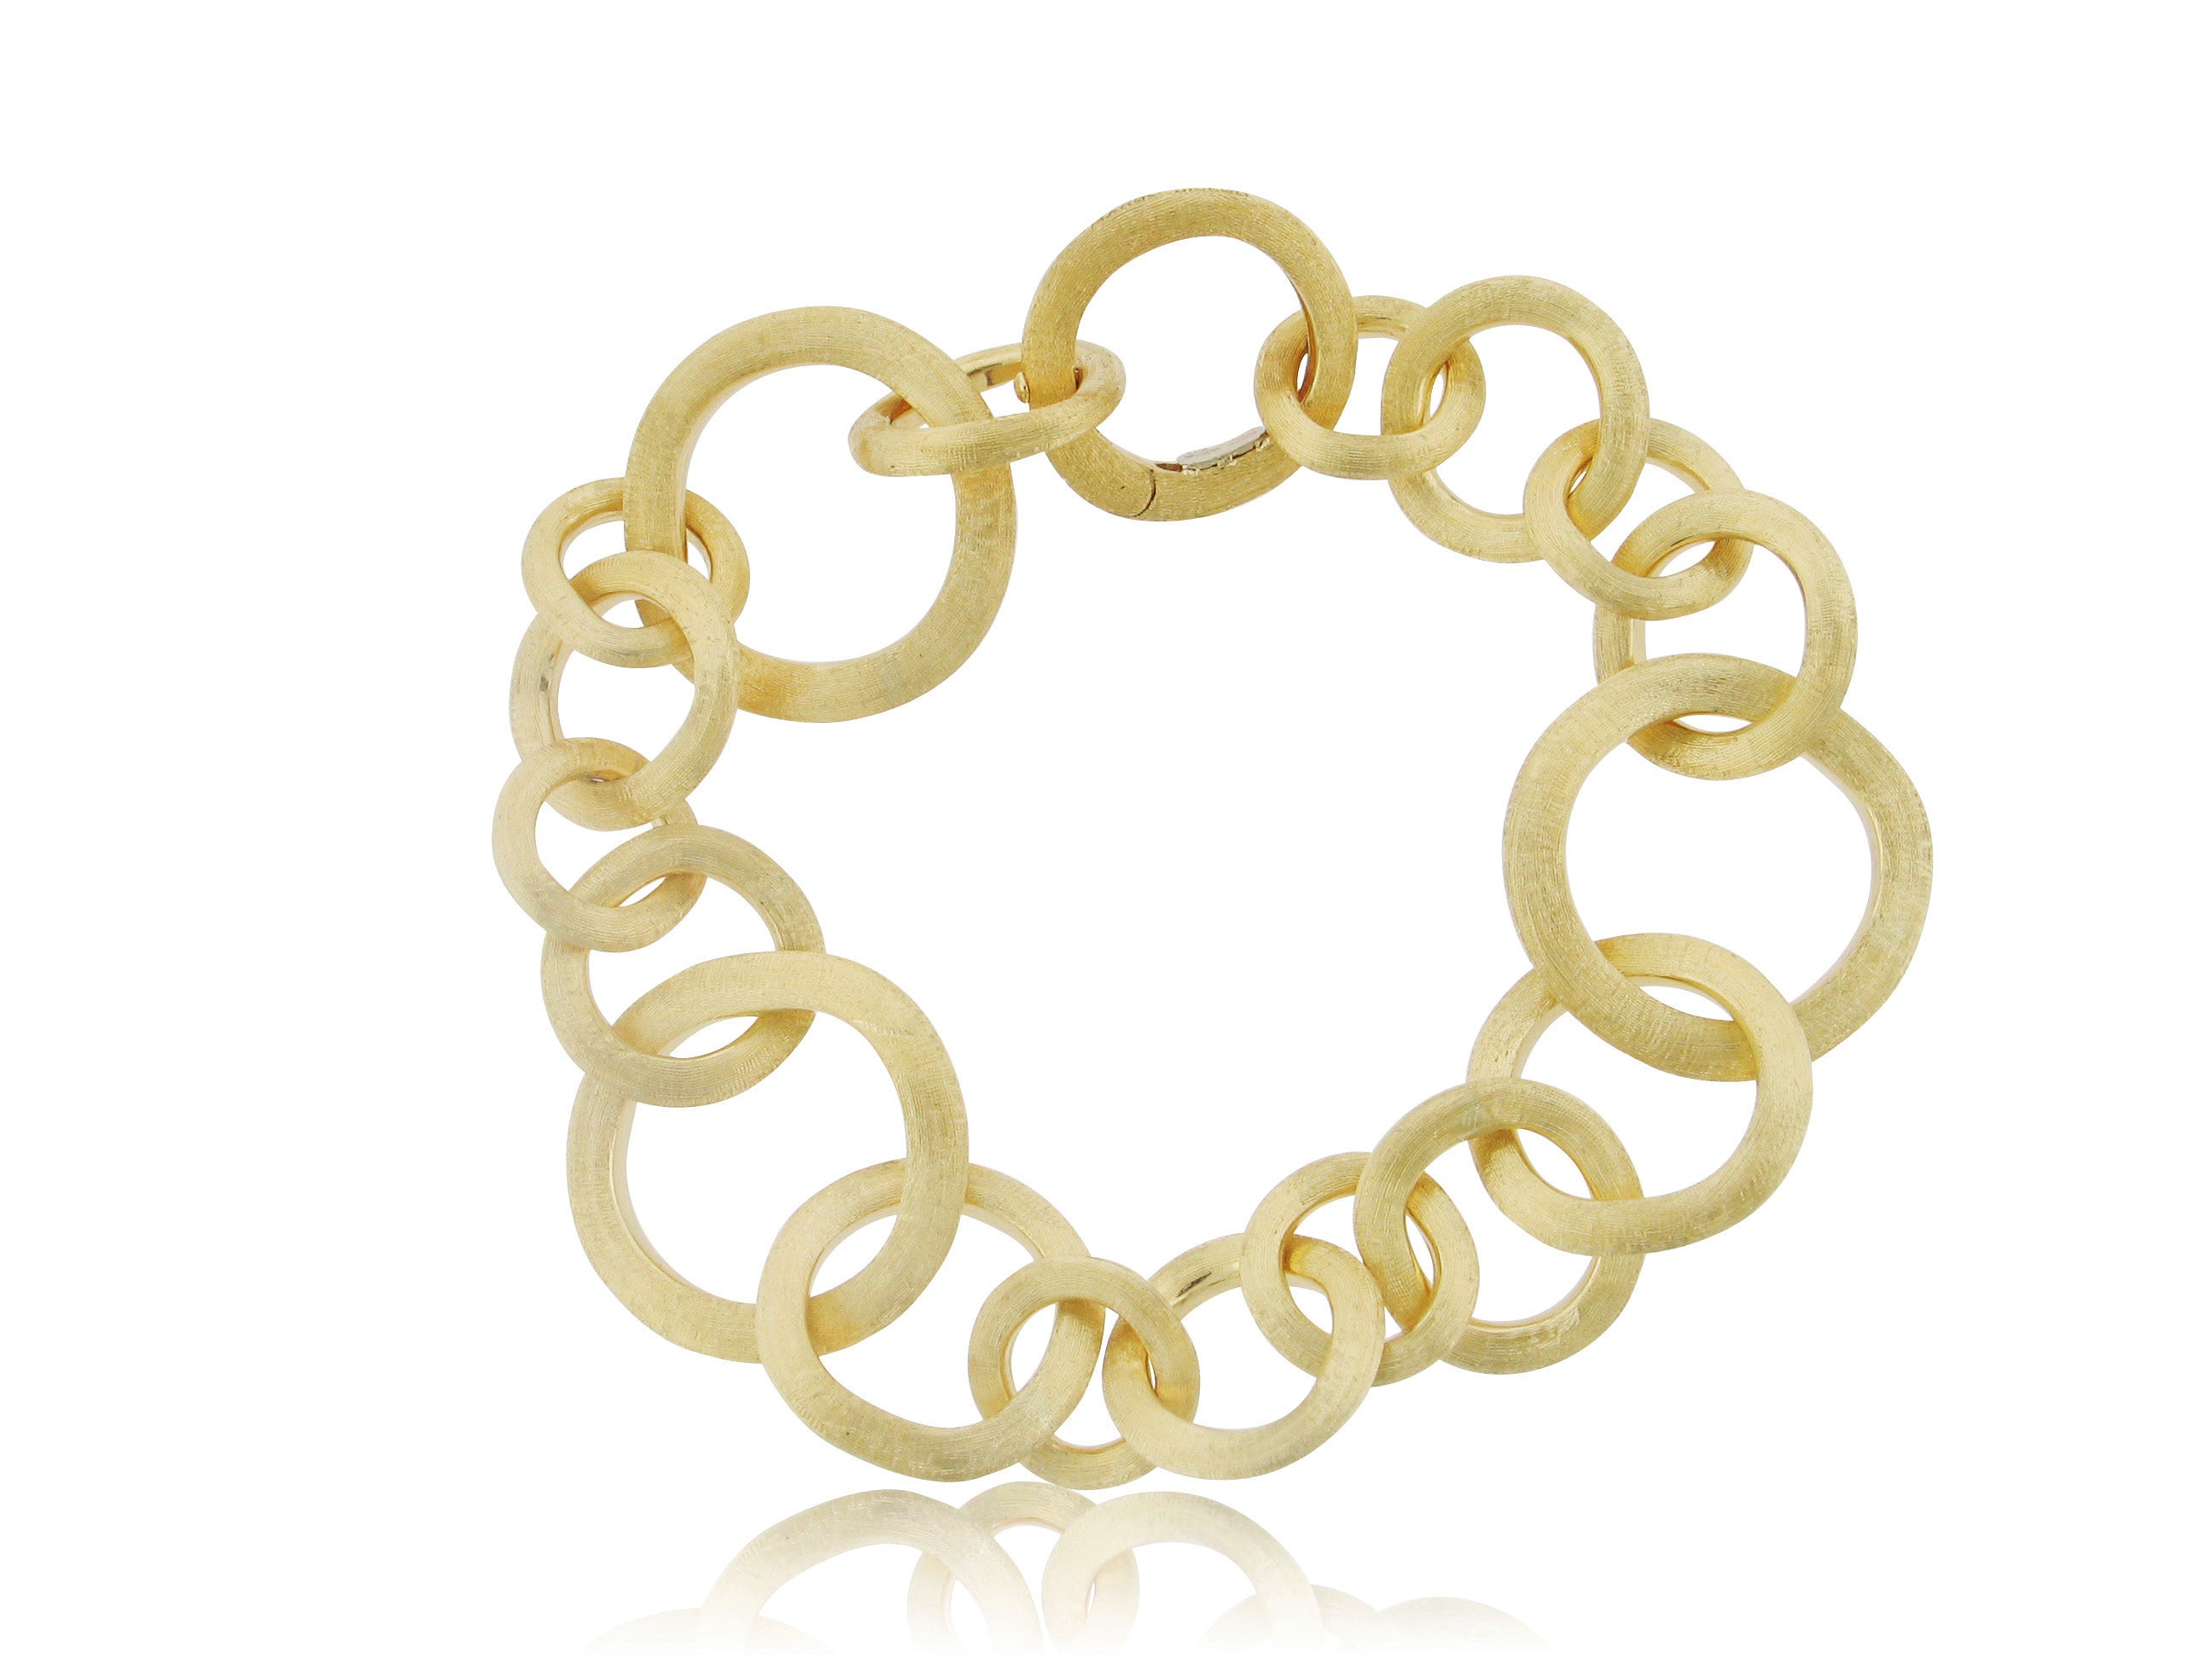 MARCO BICEGO 18K YELLOW GOLD SATIN FINISHED LINK BRACELET FROM THE JAIPUR COLLECTION